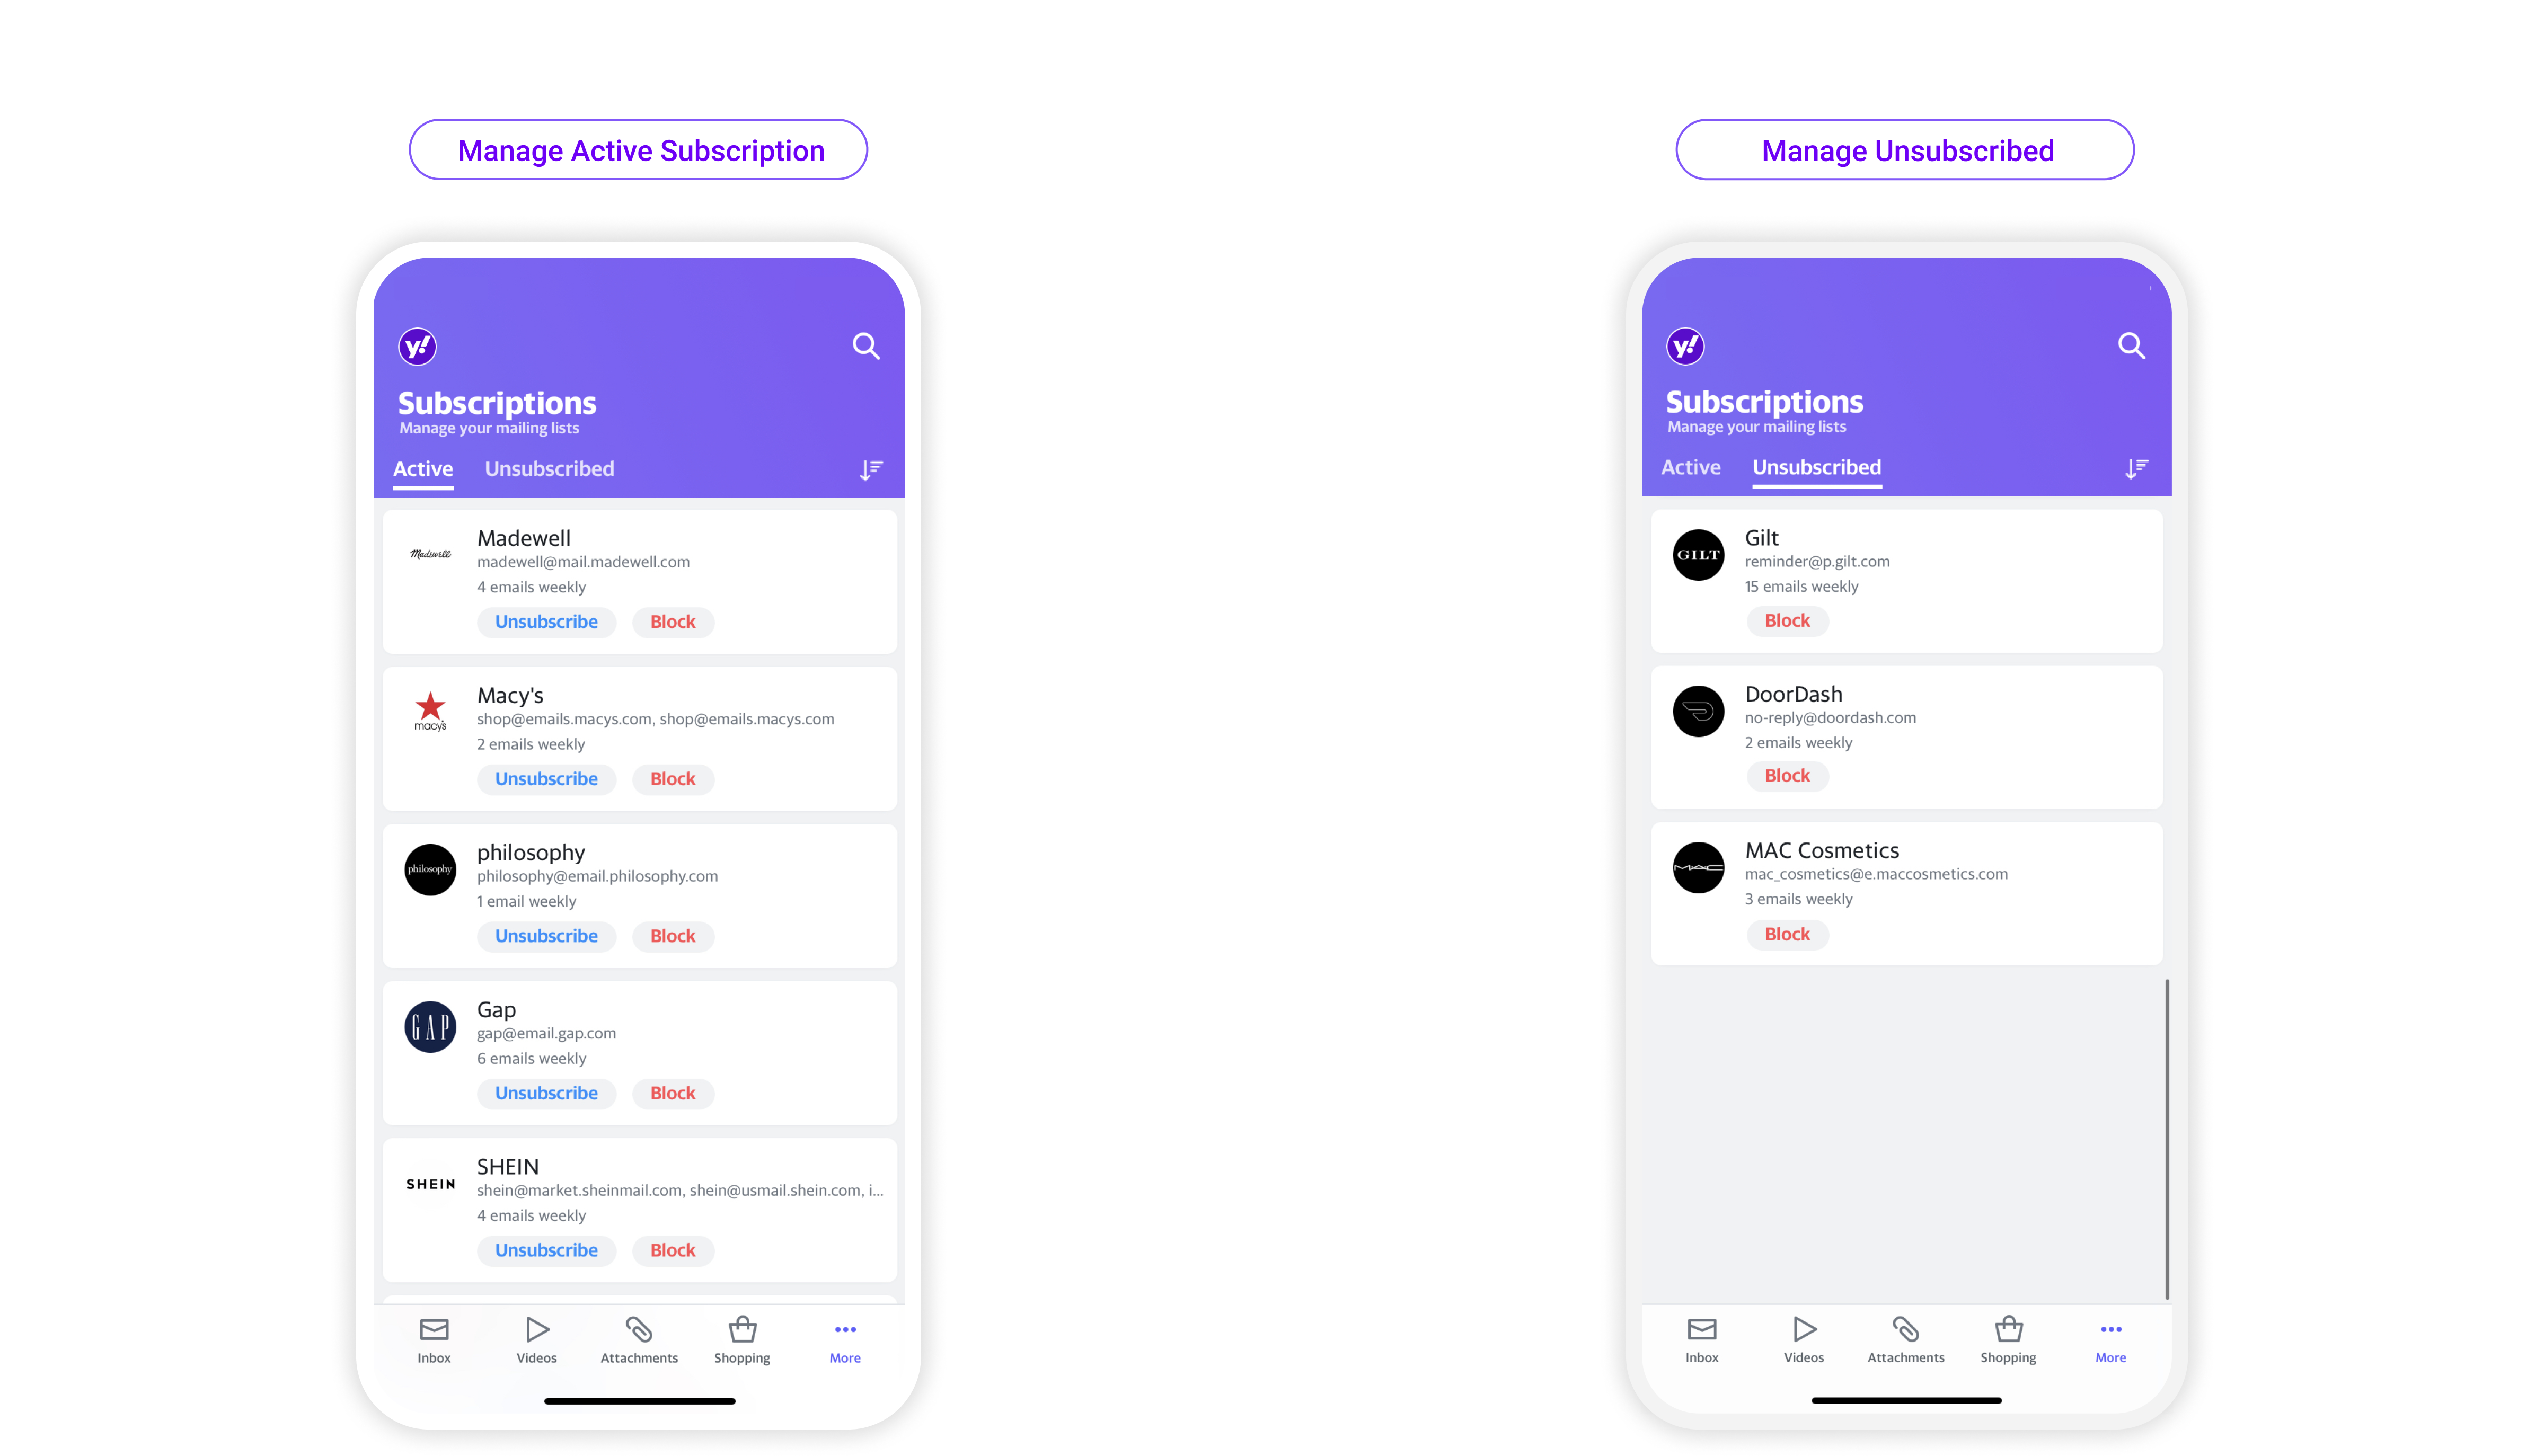 Yahoo Mail updated with deal unsubscribe and shopping views - 9to5Mac